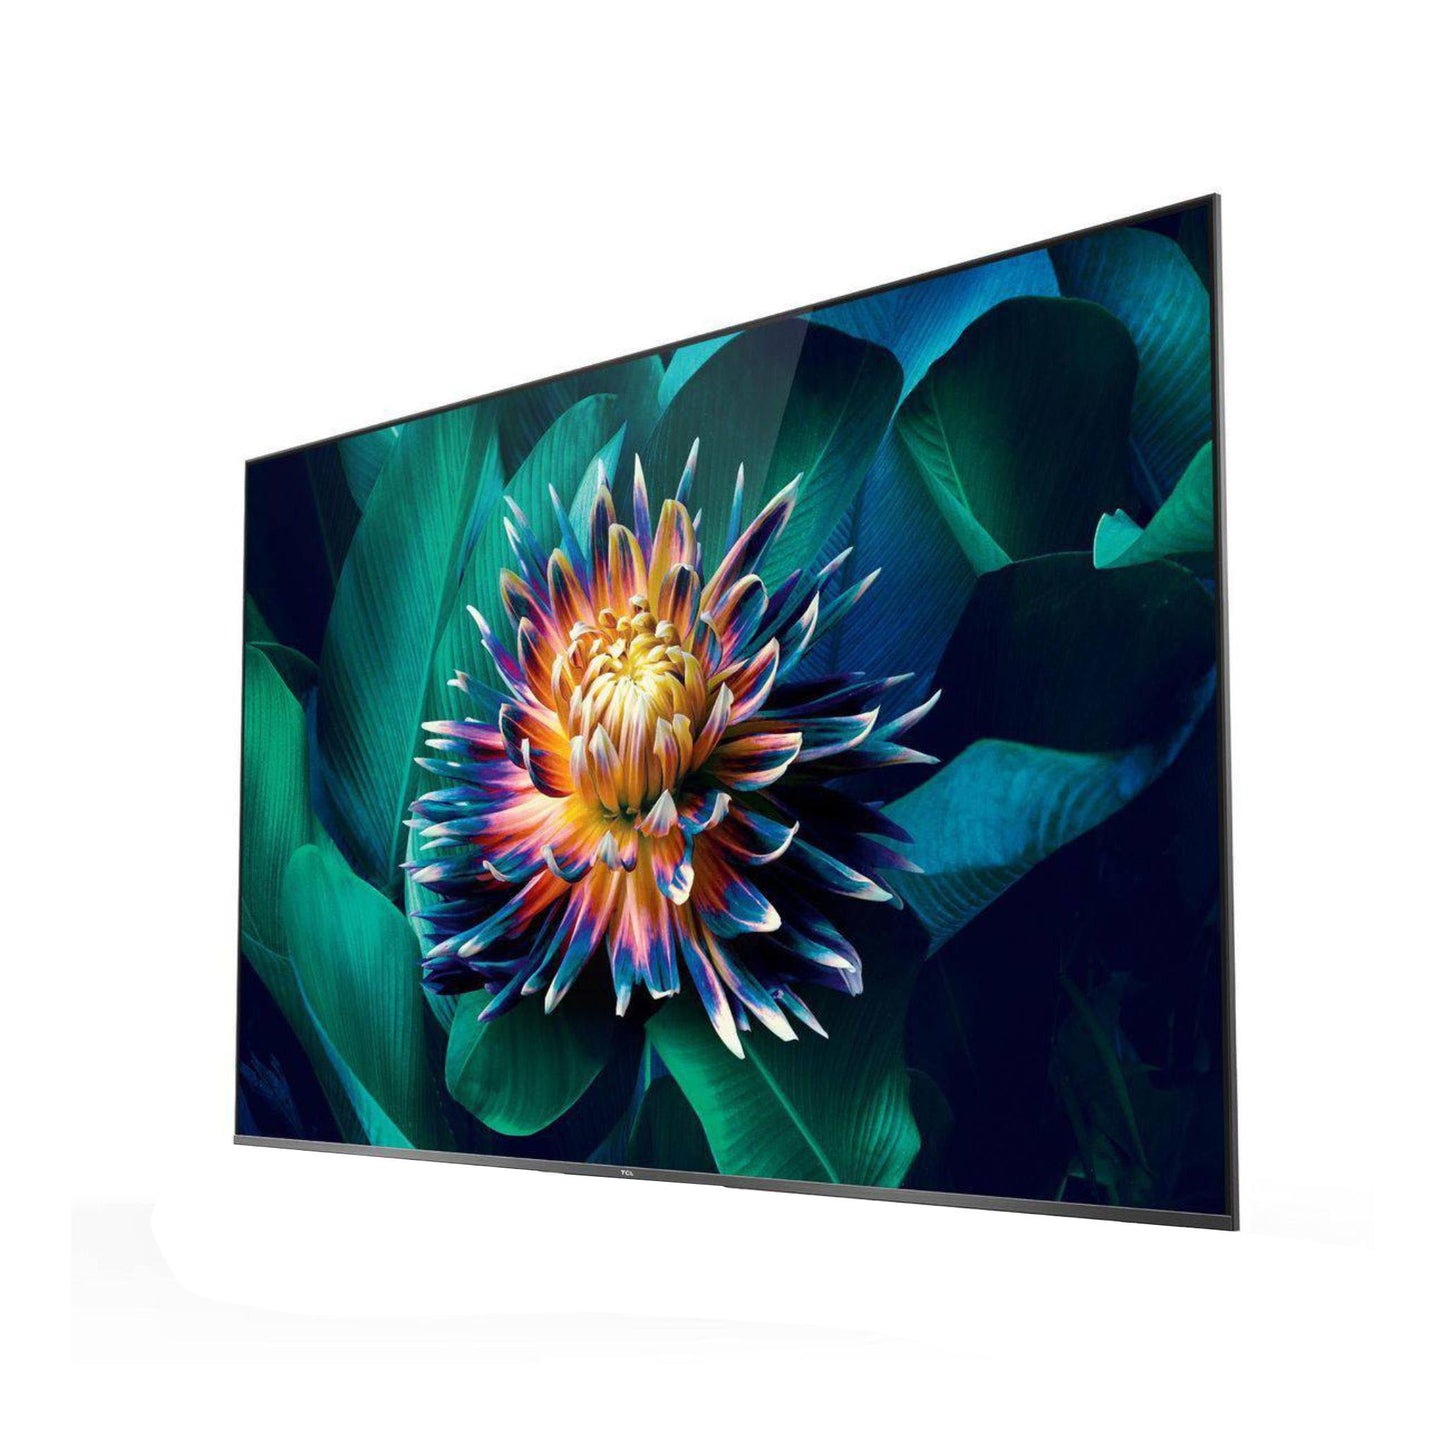 TCL 75 inch Android Smart QLED TV, 65C725